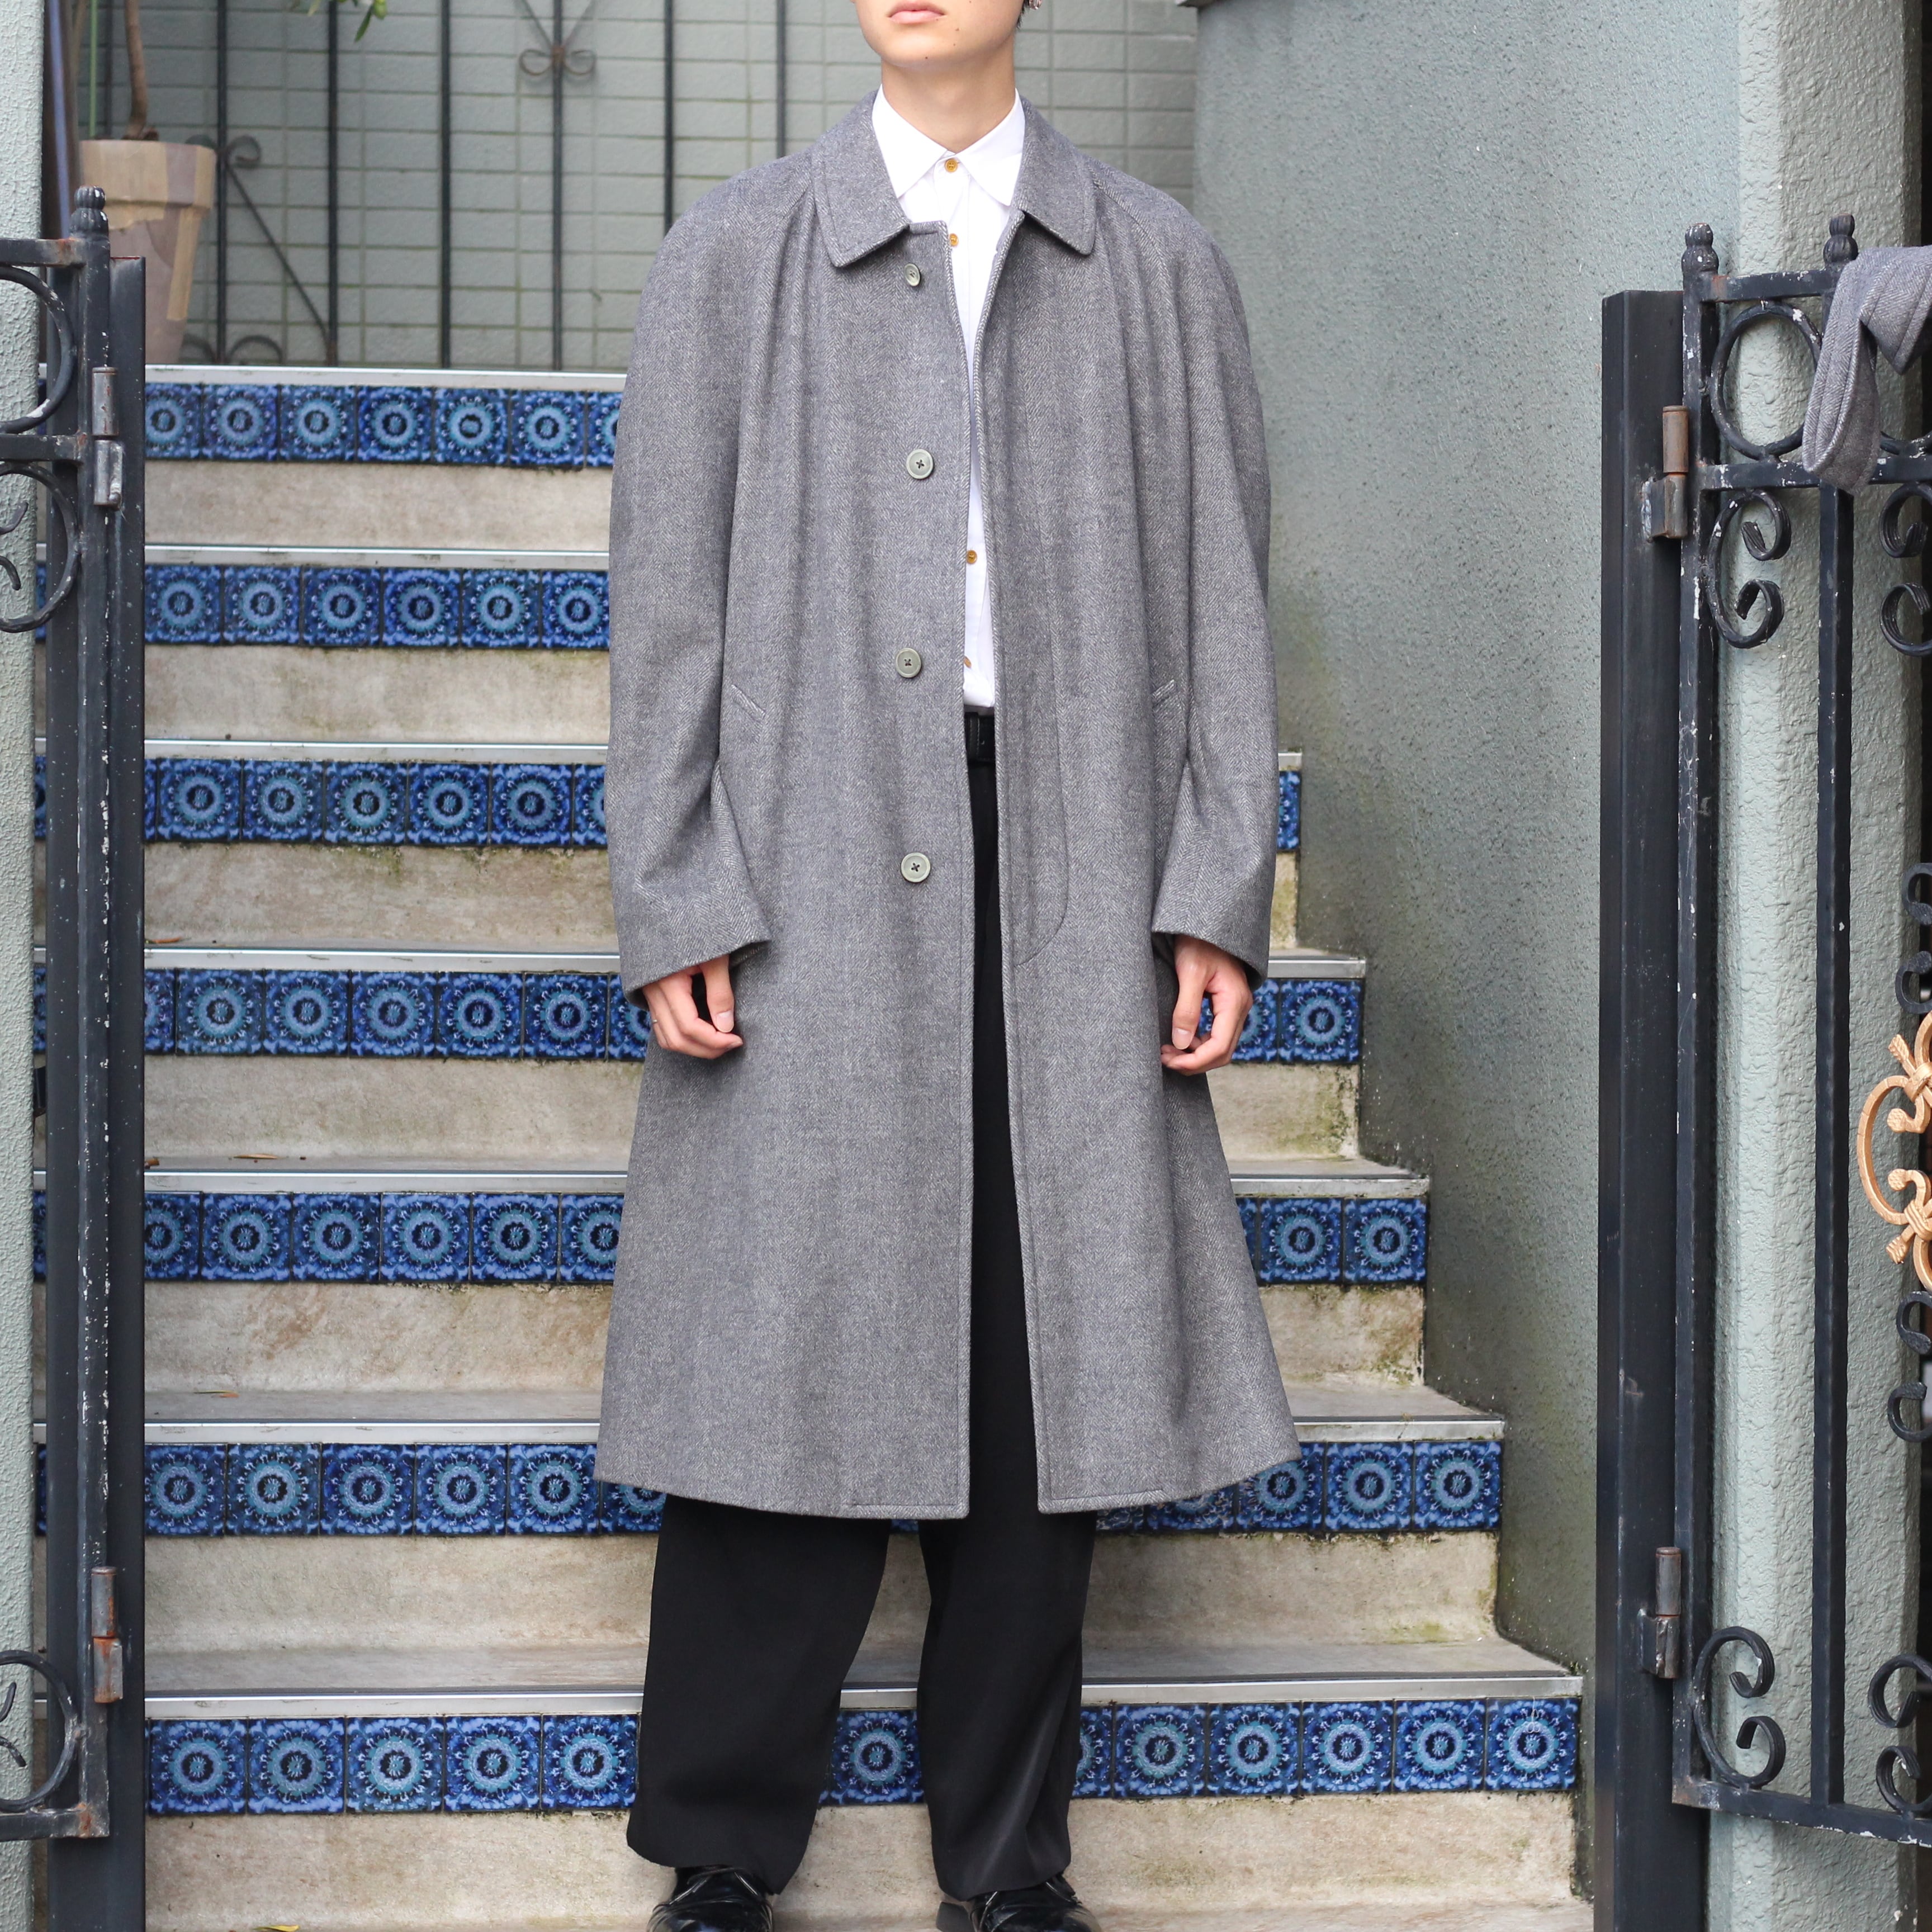 CORNELIANI CASHMERE BREND WOOL BELTED BALMACAAN COAT MADE IN ITALY ...